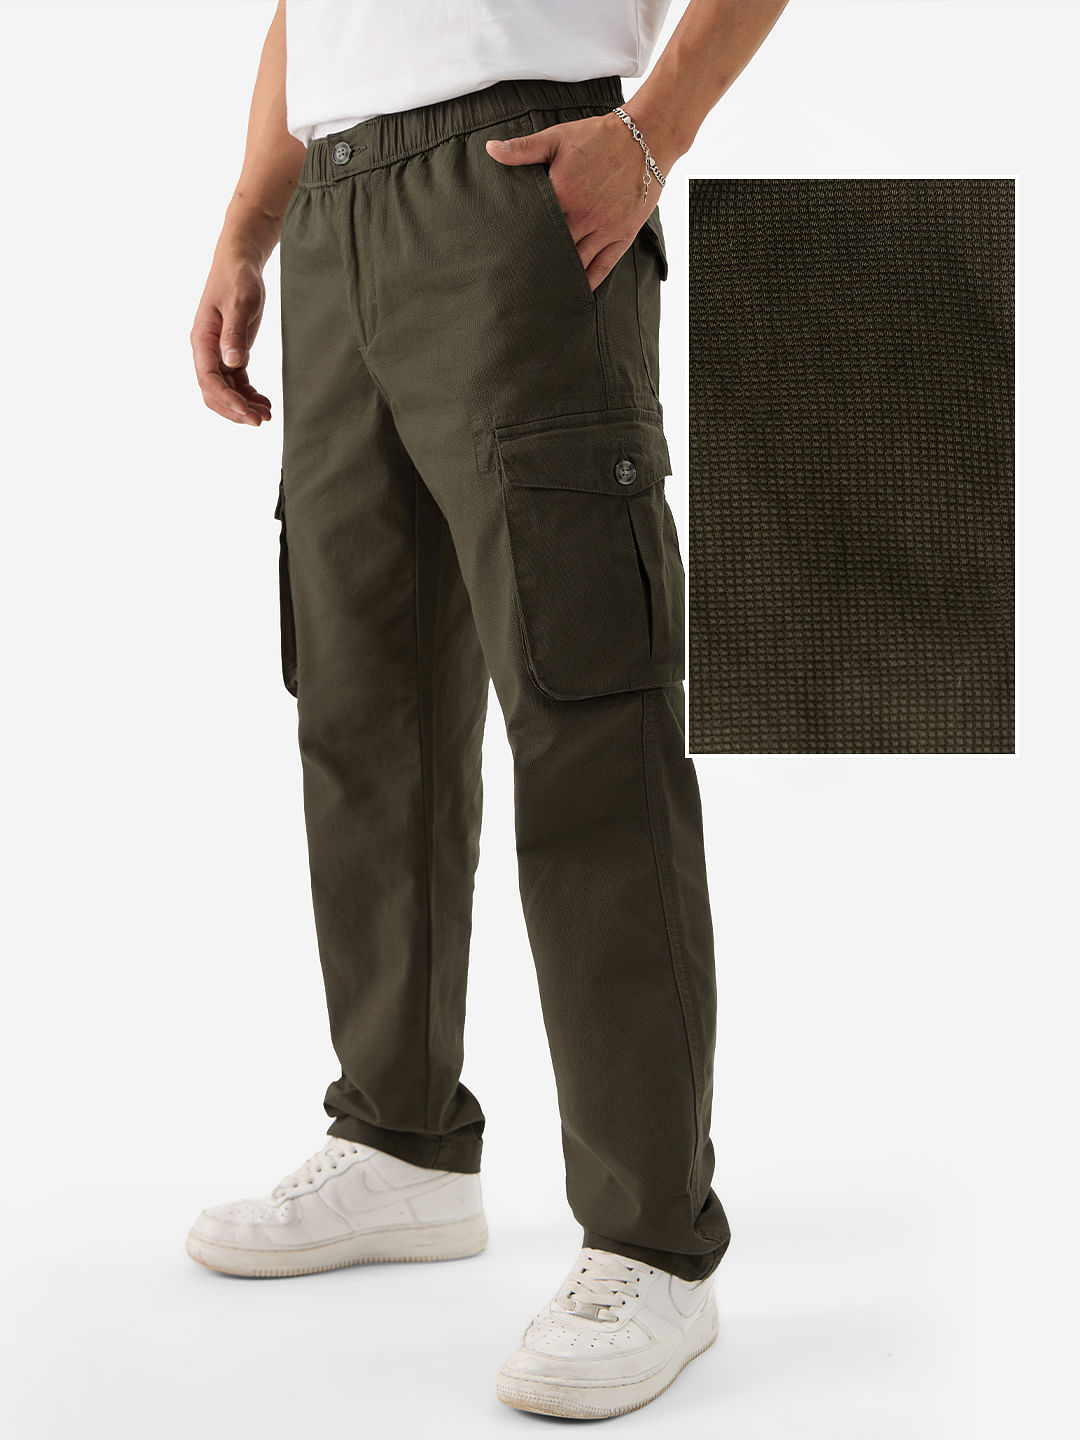 Vintage Mens Pants Cargo Trousers Surplus Work Casual Combats Army Olive  XS-XXL | eBay